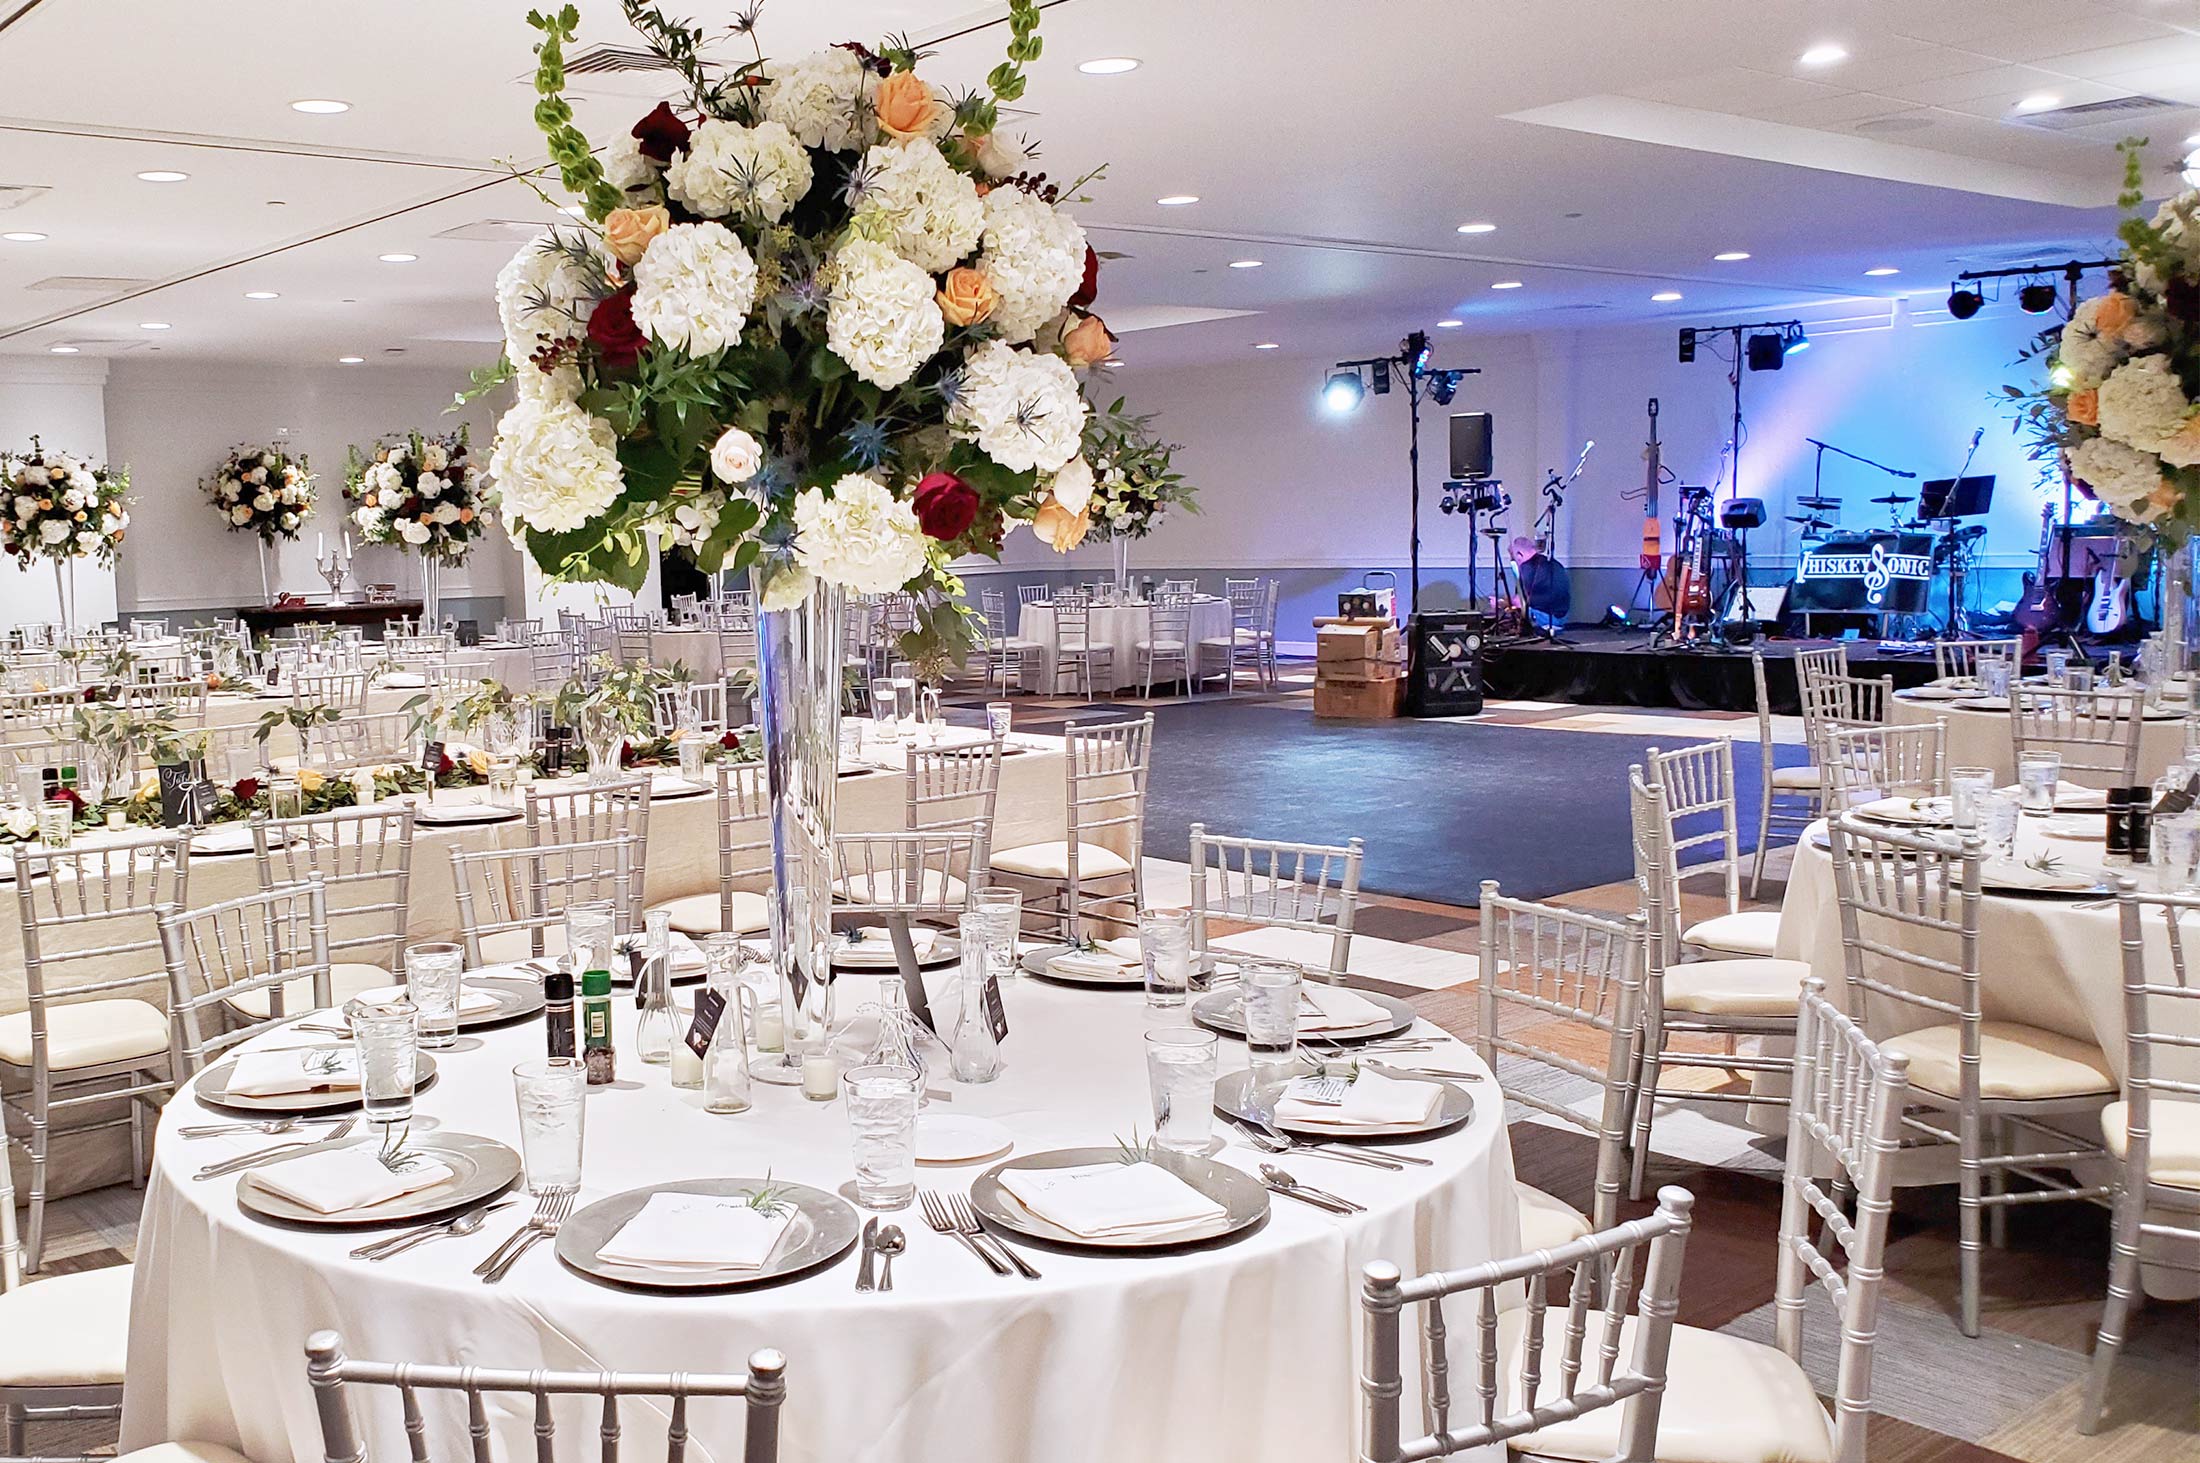 anquet rounds with floral arrangements and stage for live music